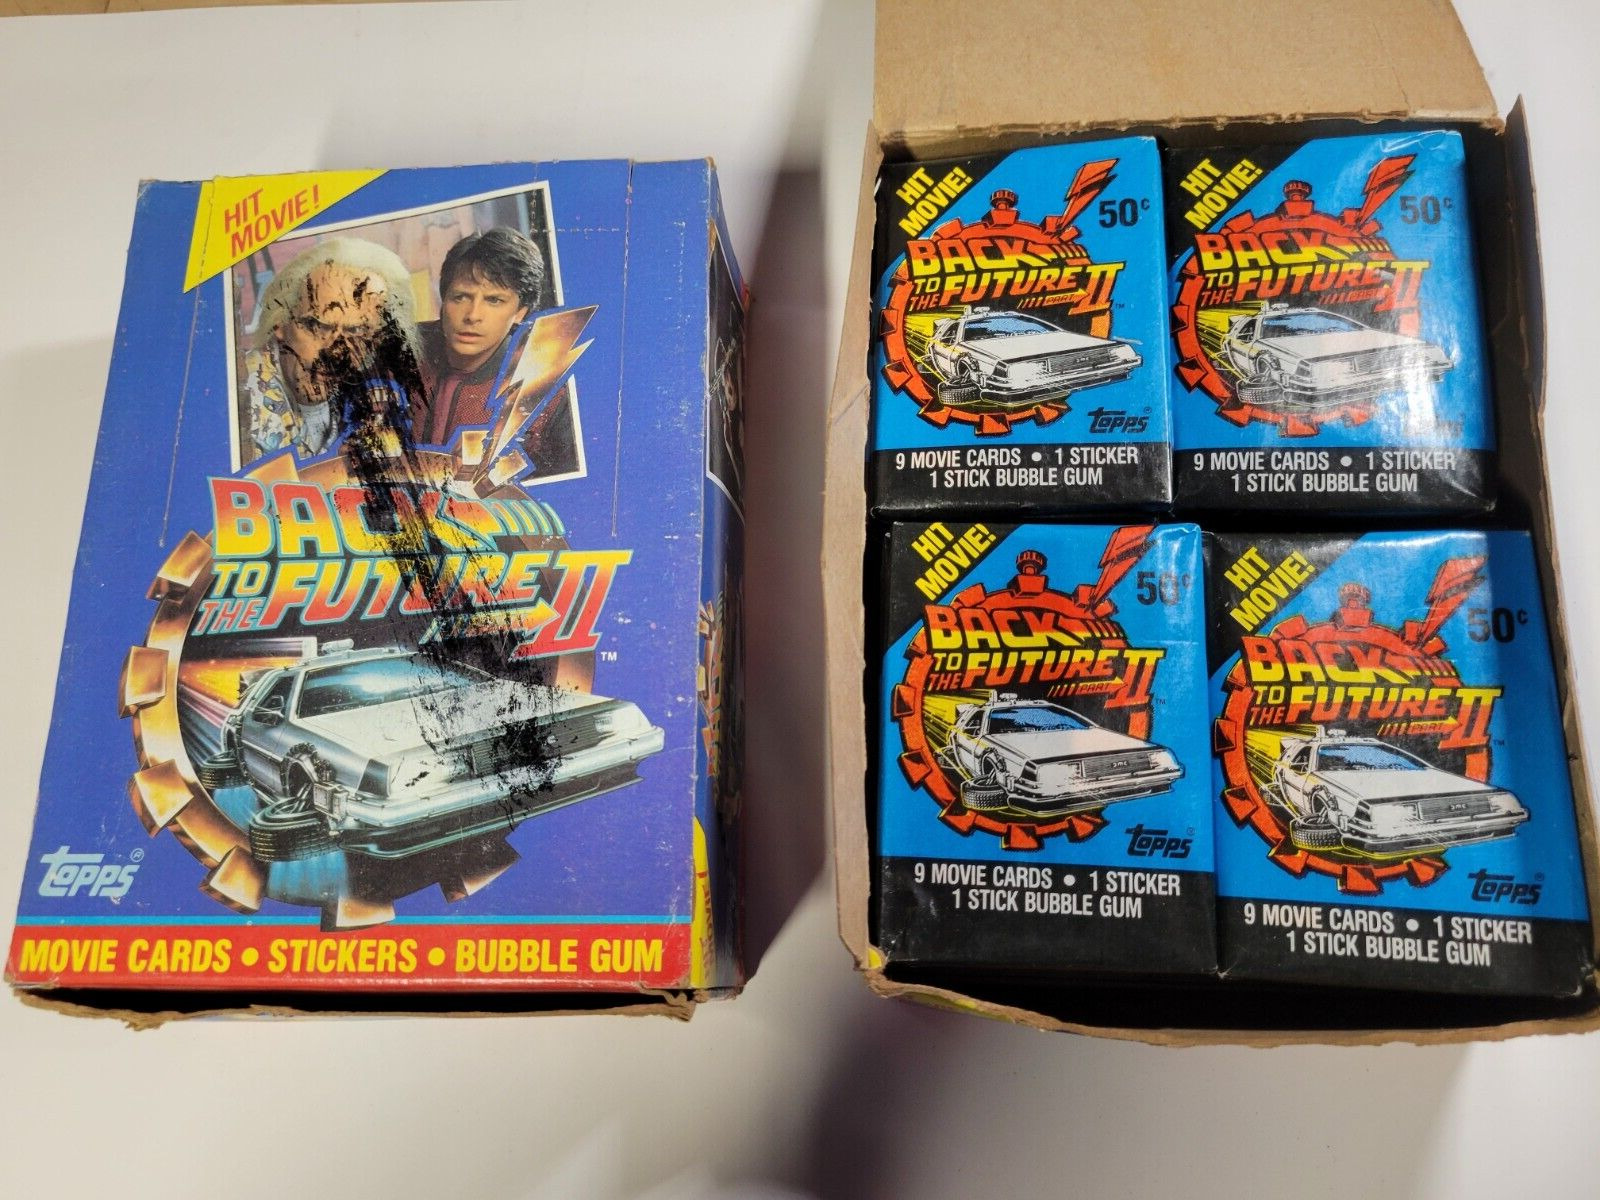 Back to the future trading cards box. Recently reduced by 20%